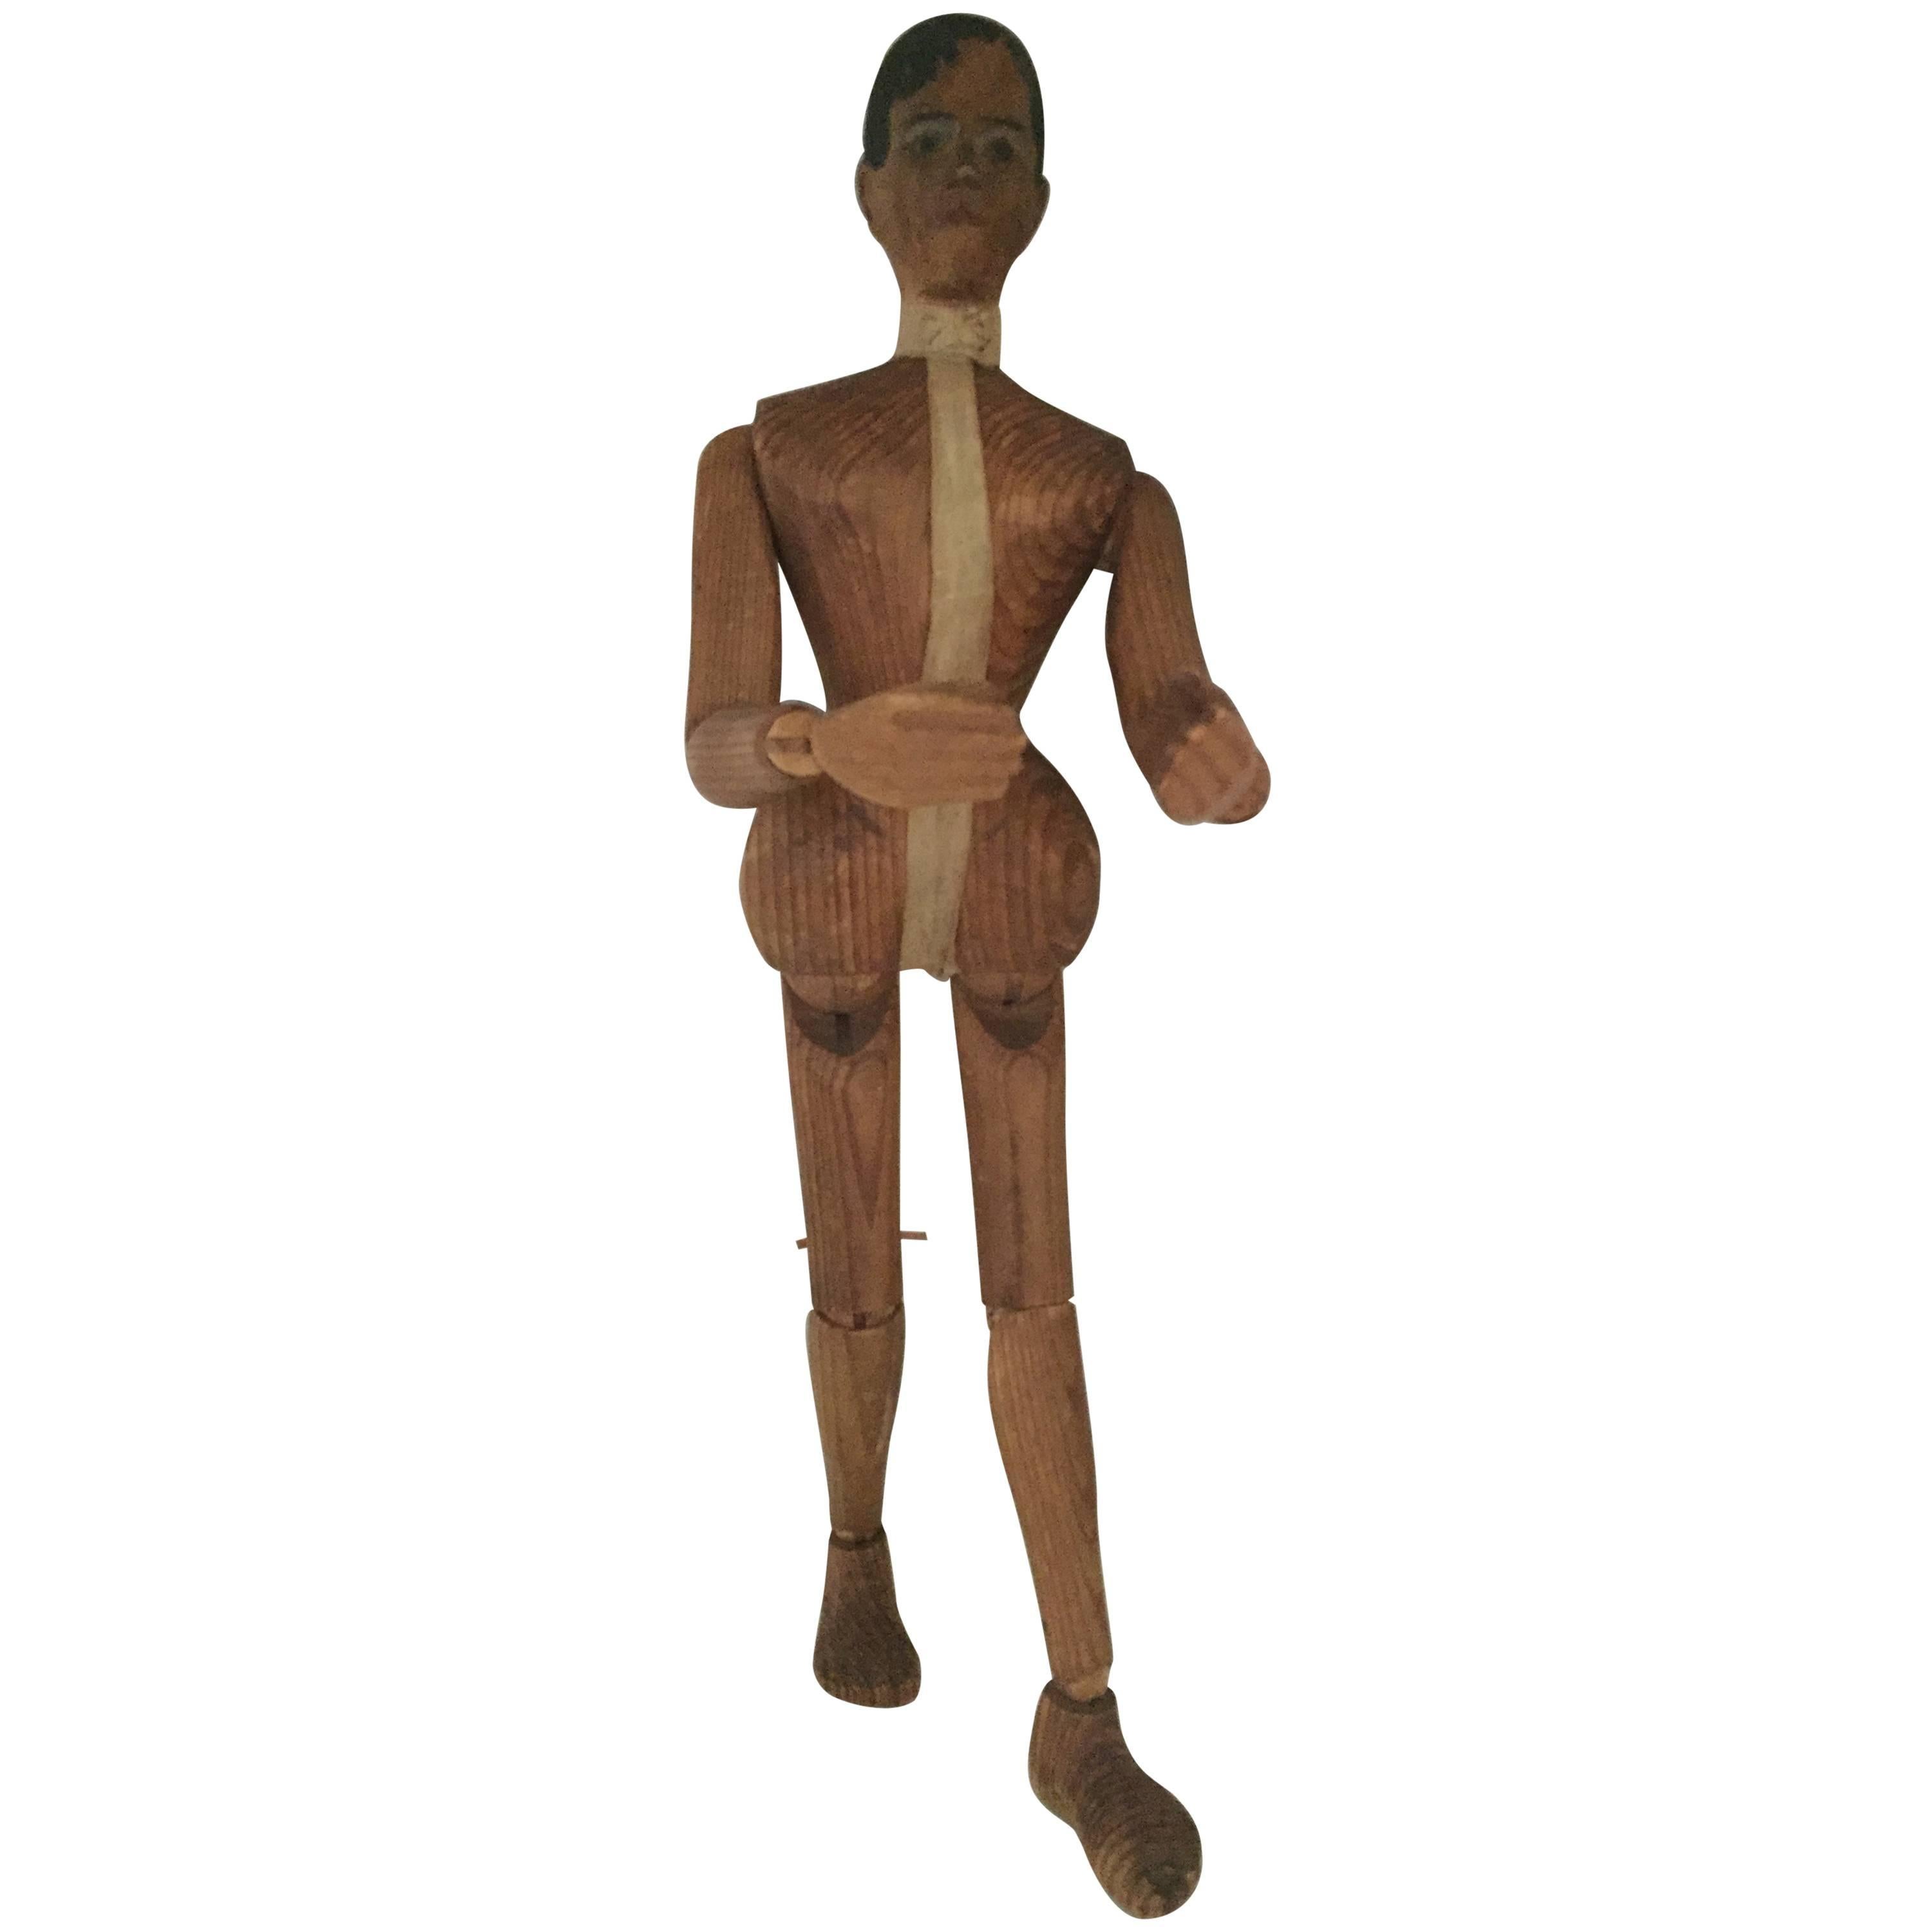 Lay Figure or Artist Mannequin, 19th Century